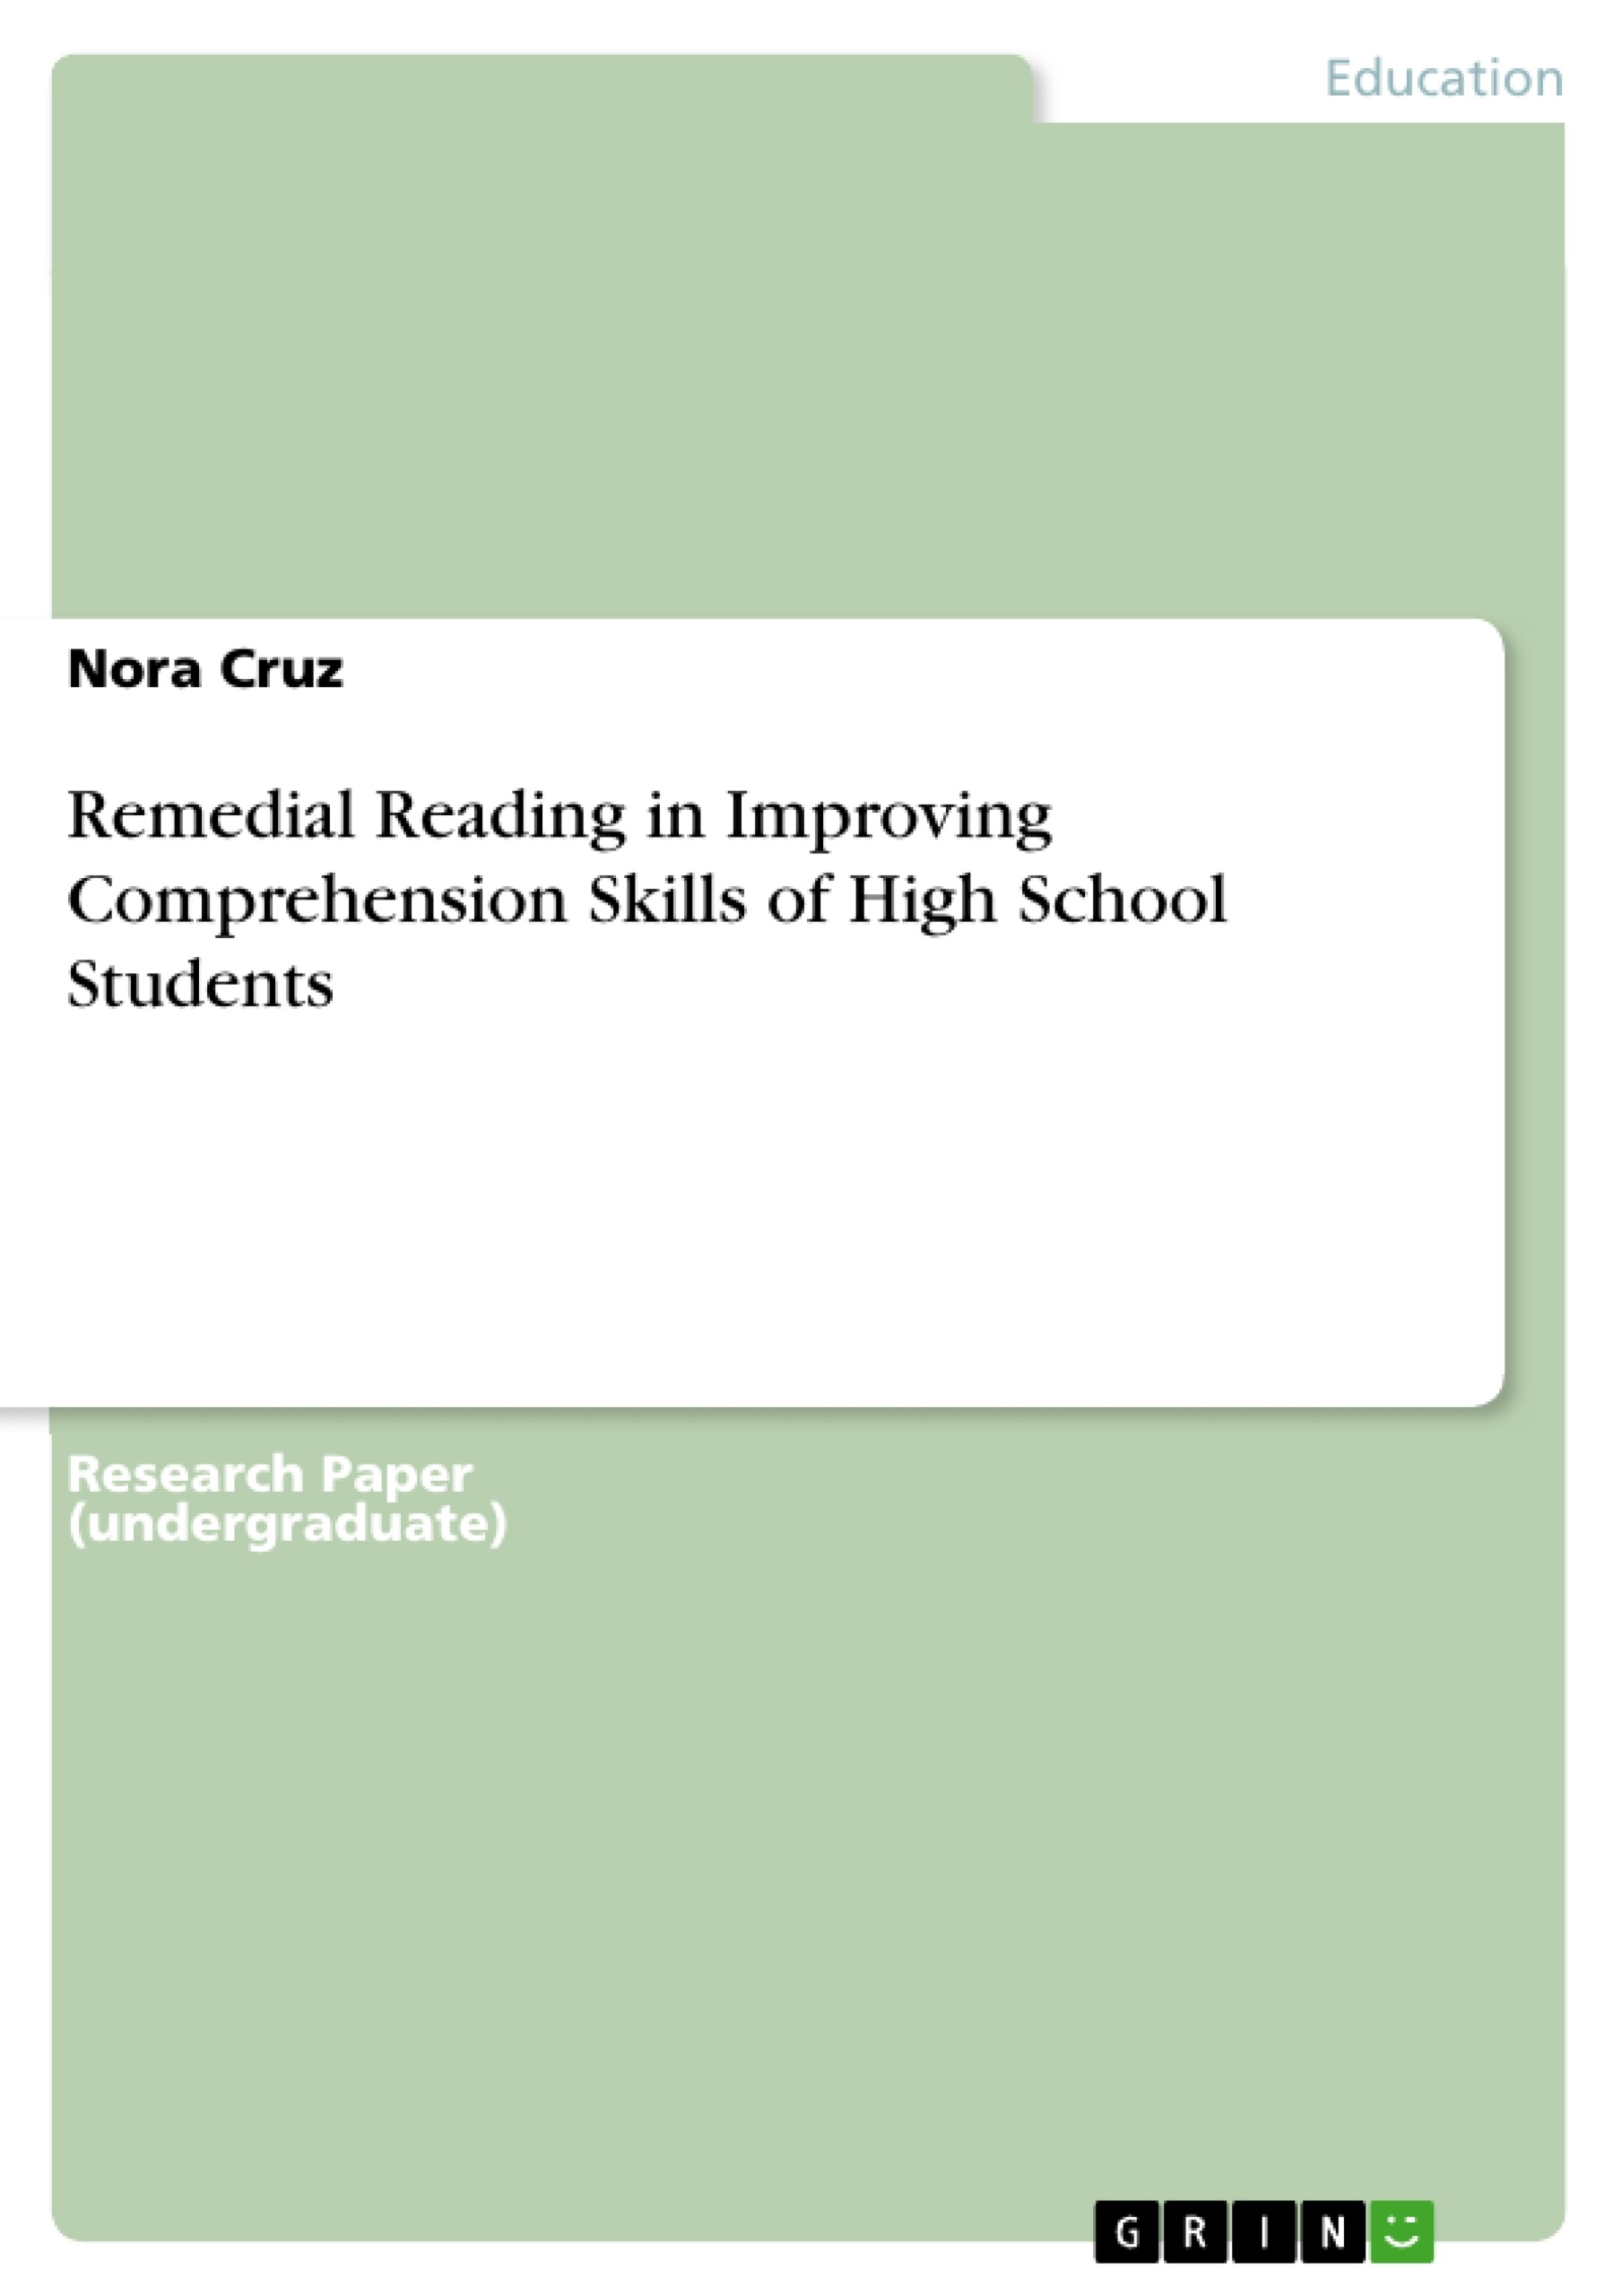 Title: Remedial Reading in Improving Comprehension Skills of High School Students